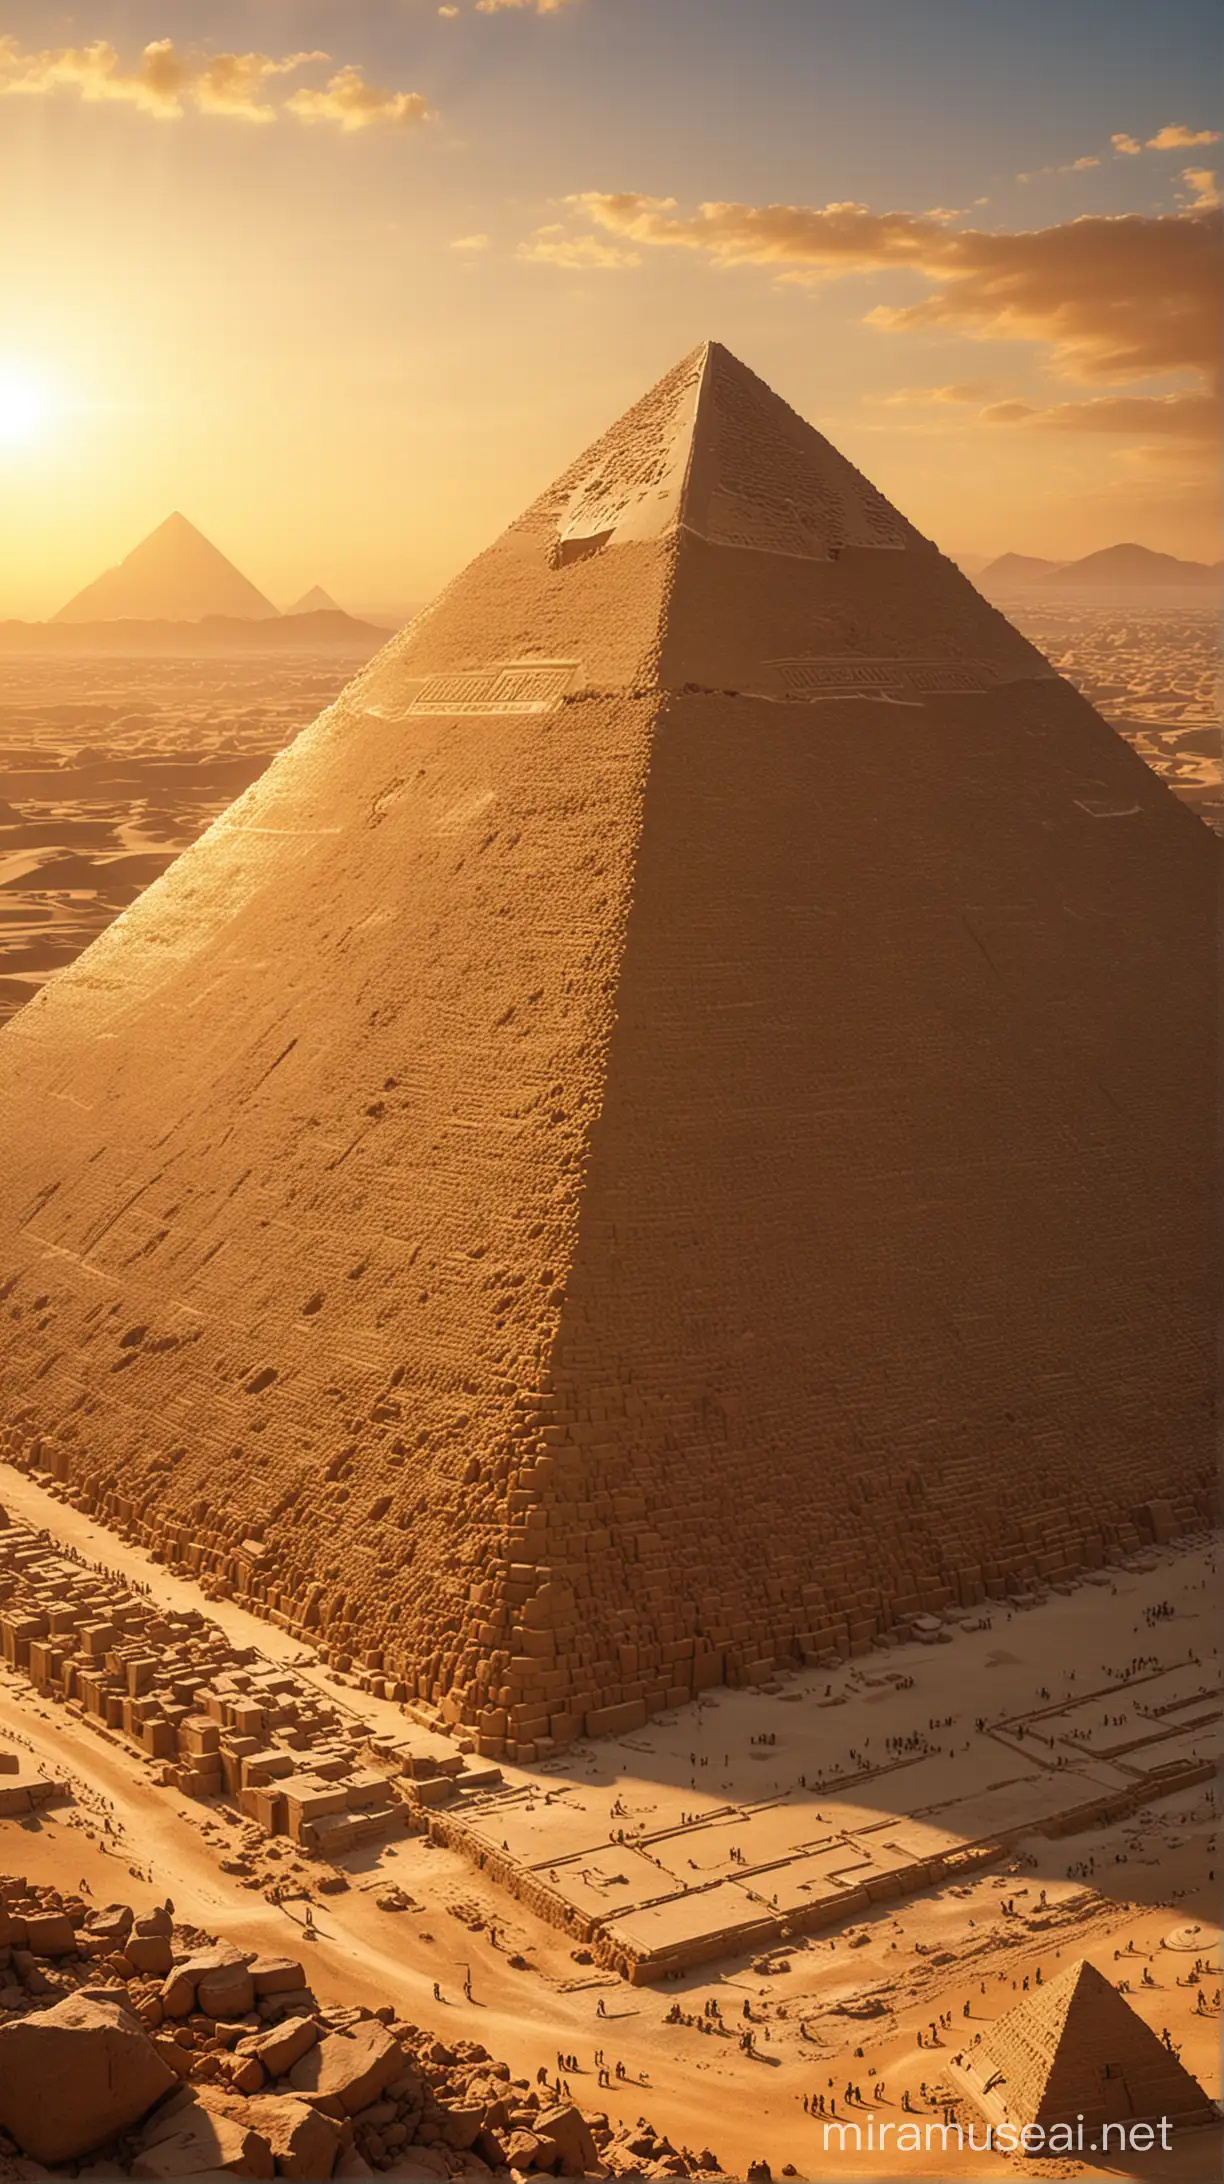 A hyper-realistic close-up of the Great Pyramid's peak in its prime. A gleaming golden pyramid-shaped capstone rests majestically on top, reflecting the rays of the setting sun.
